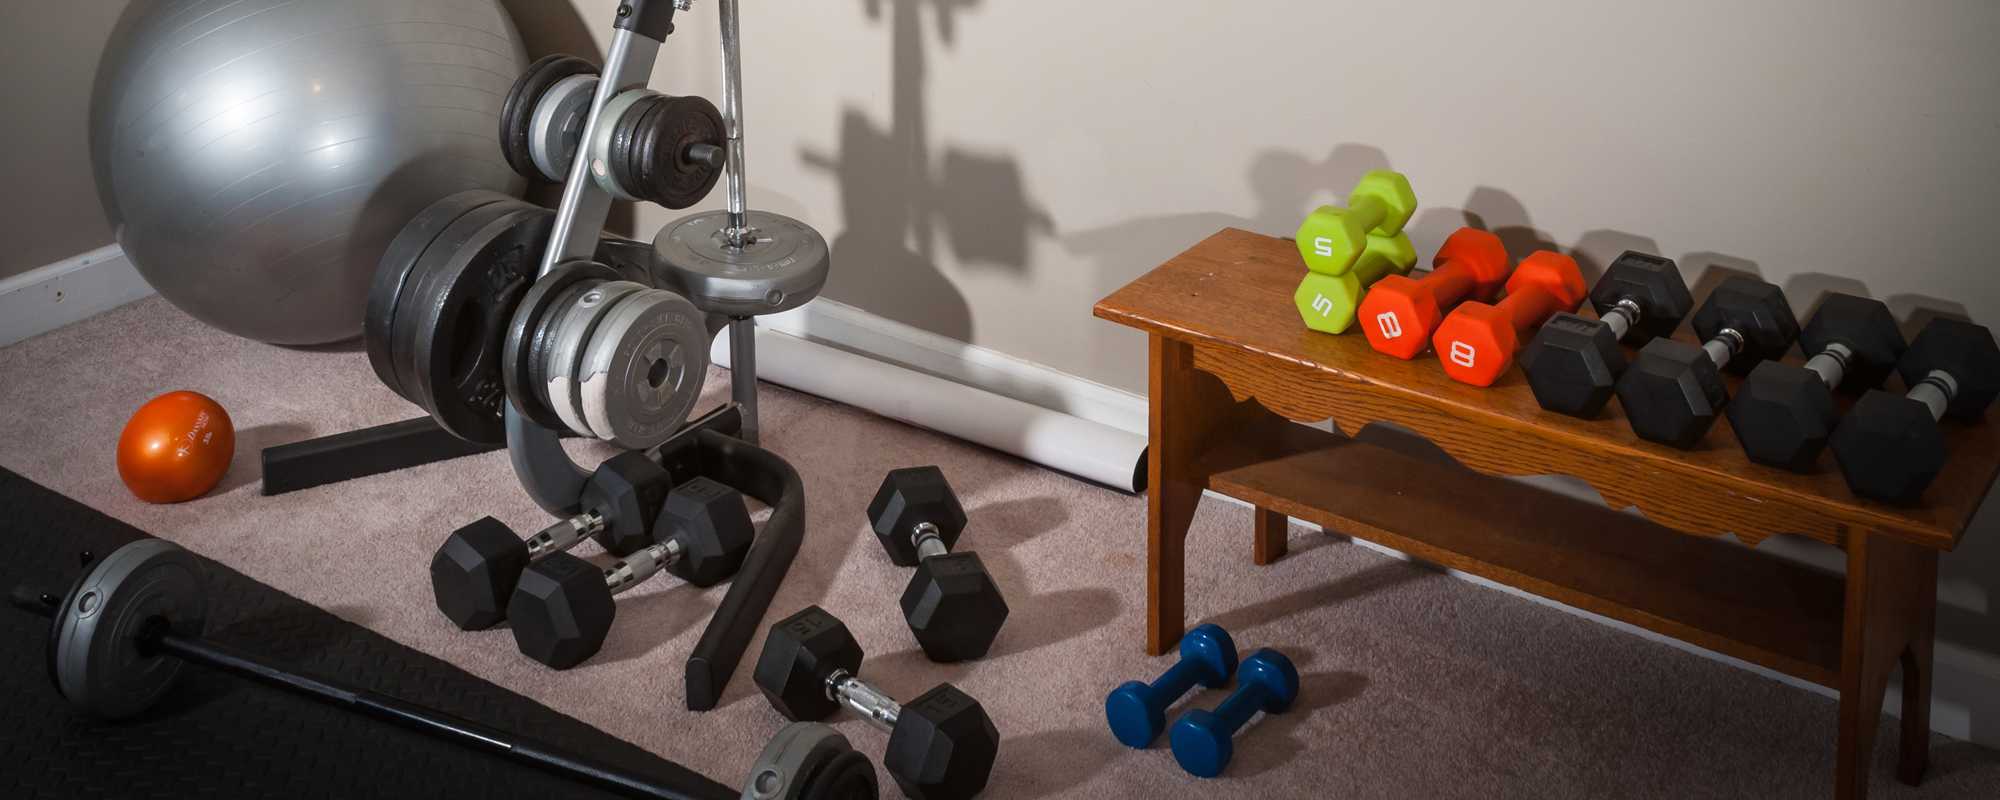 How To Store Weights At Home